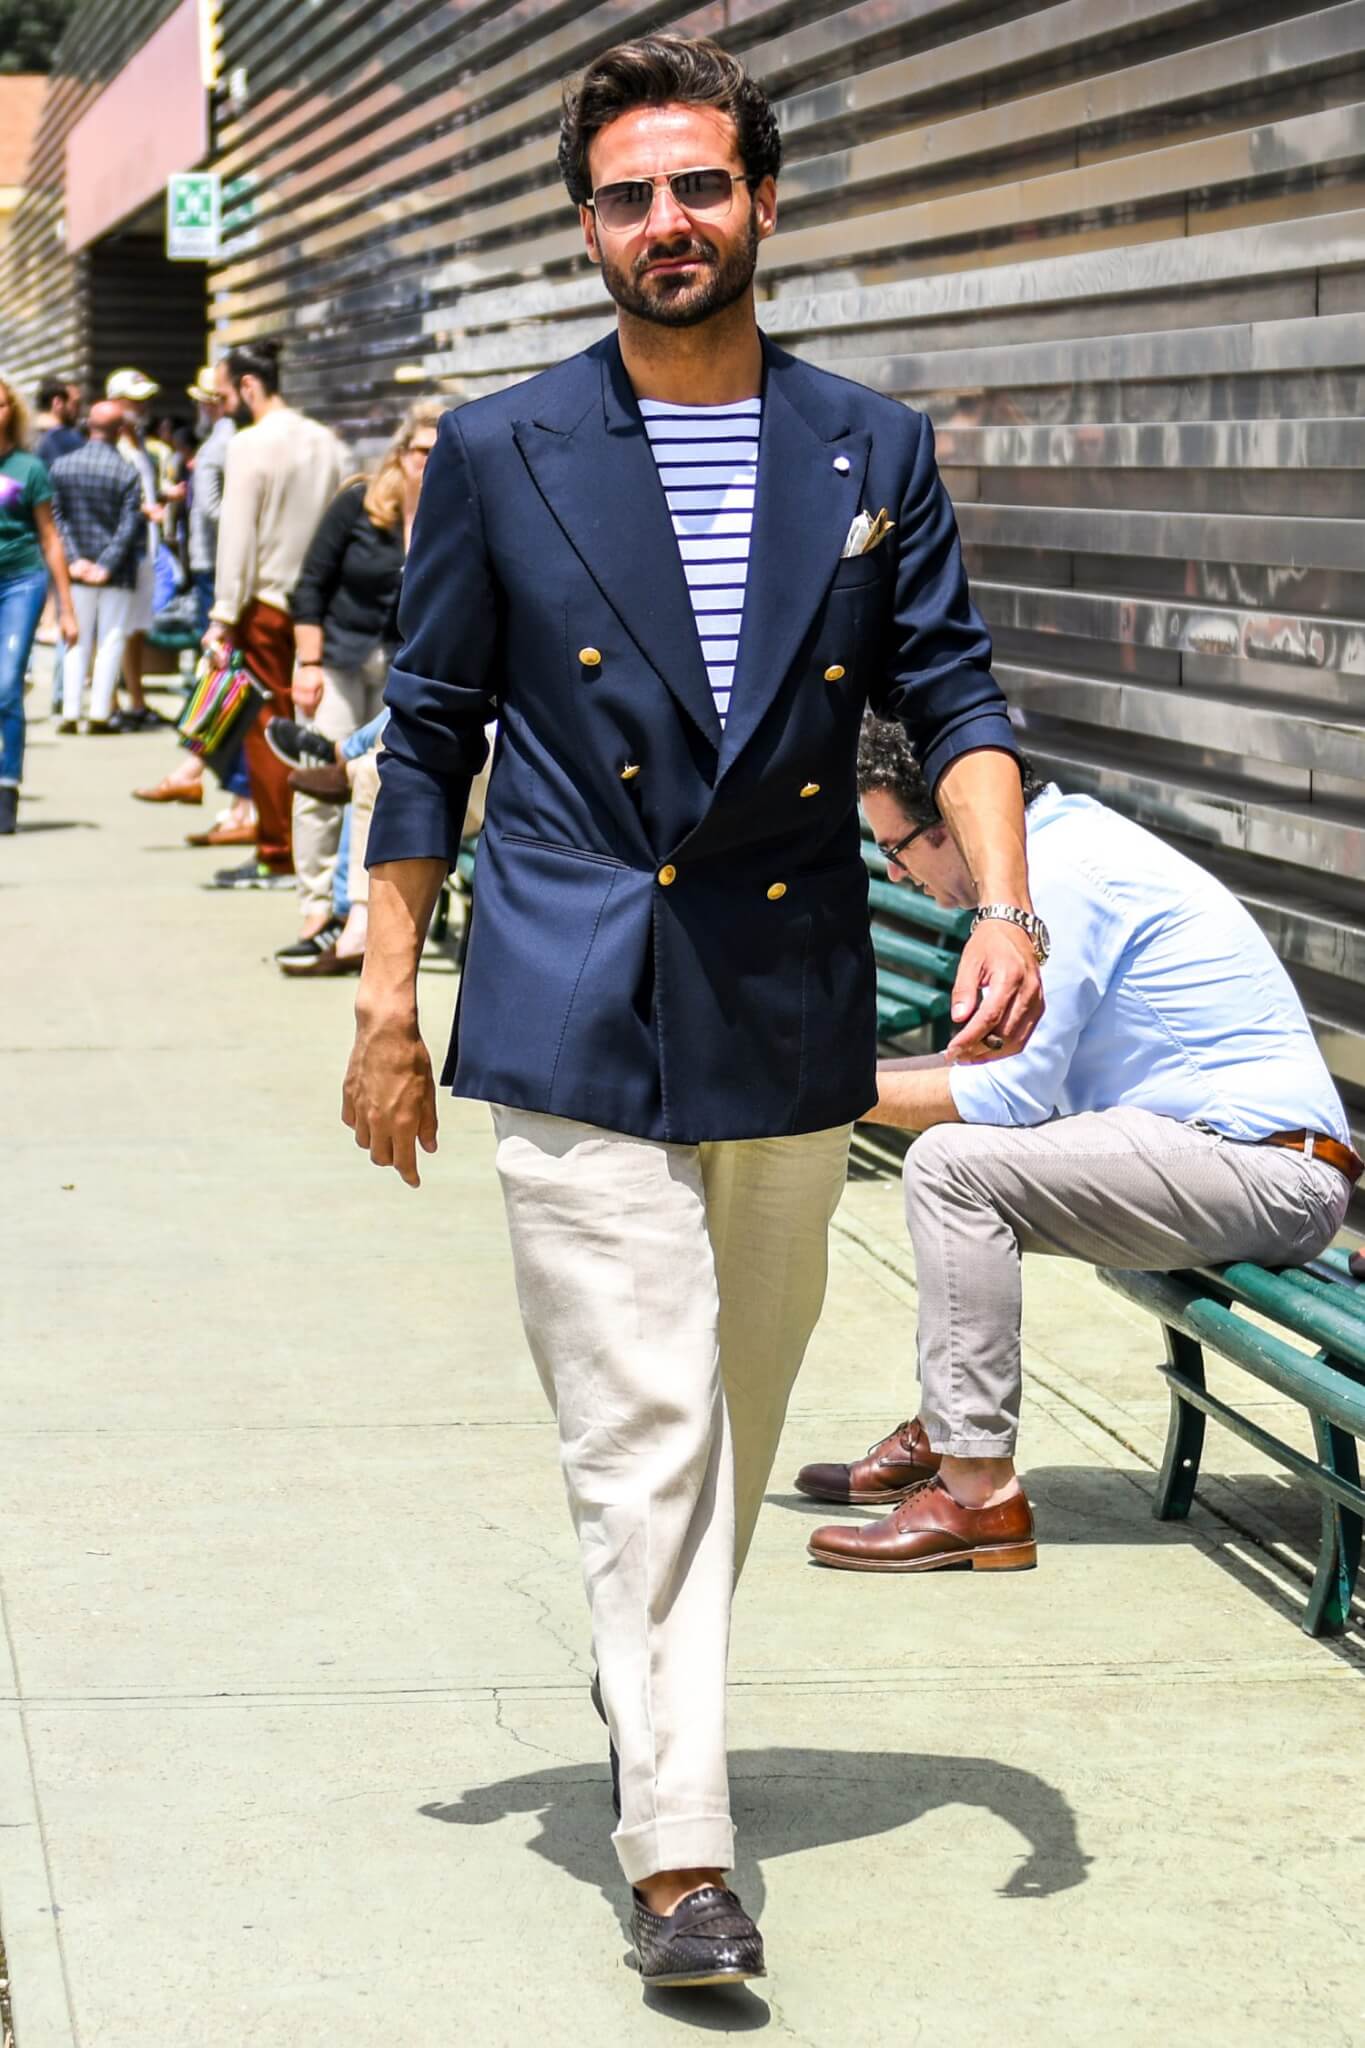 Navy Jacket Codes for Men! From classy style to traditional, we